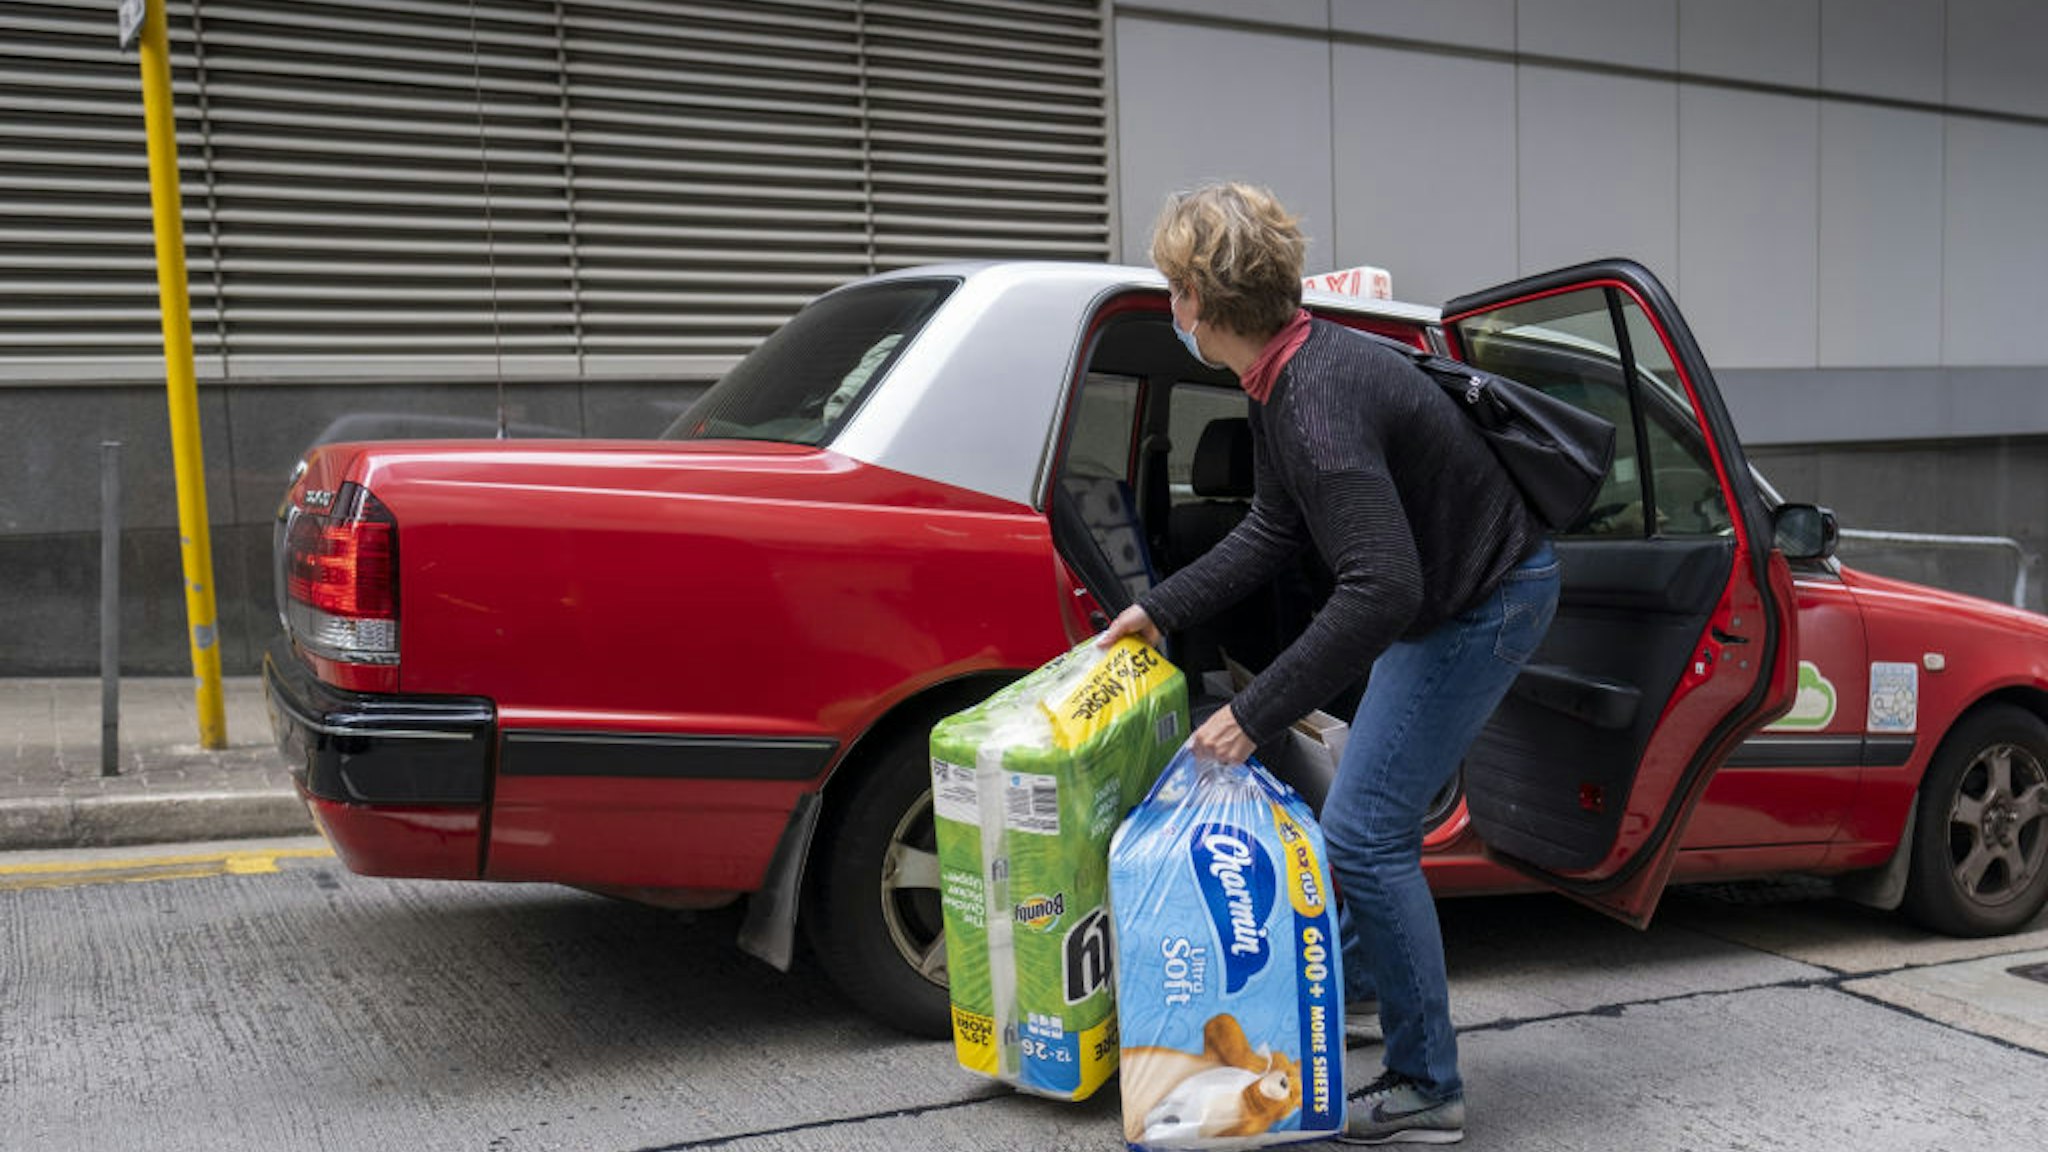 A woman loads newly purchased toilet paper and tissues into a taxi in Hong Kong, China, on Thursday, Feb. 6, 2020. Hong Kong has been struggling with a shortage of face masks to protect against the coronavirus outbreak. Now it could be facing a run on toilet paper.